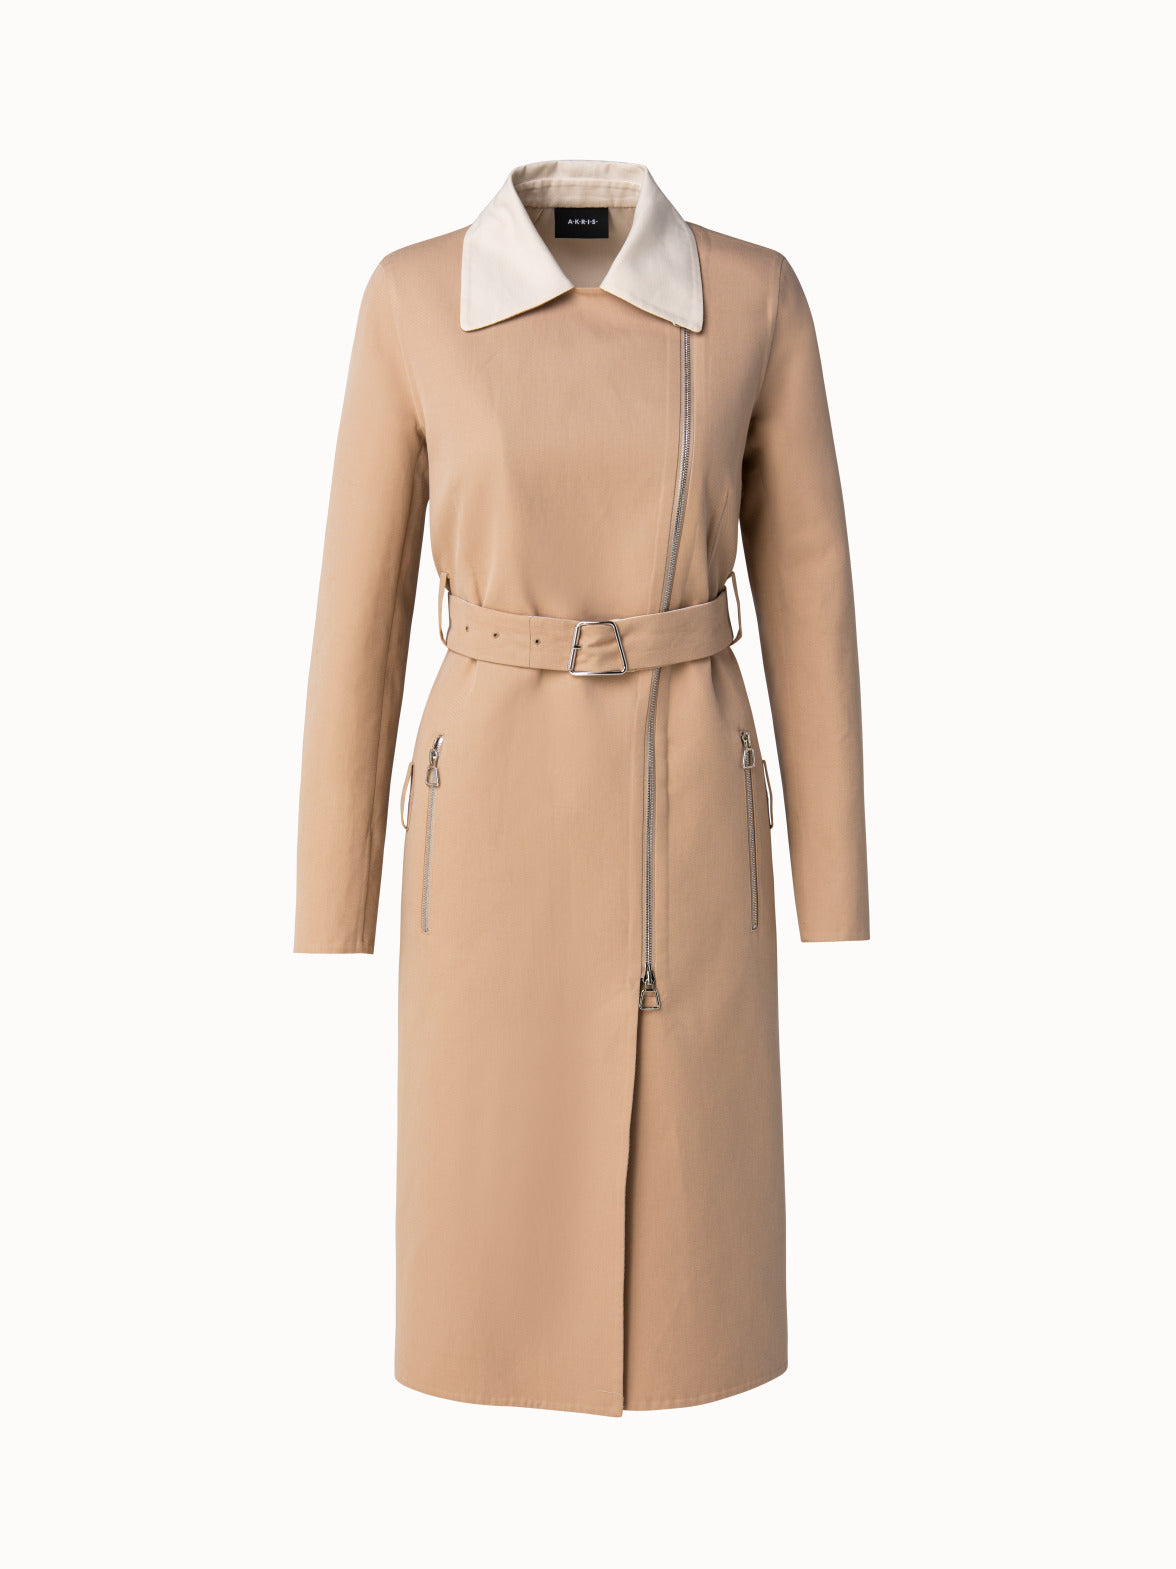 Two Tone Belted Dress Coat-